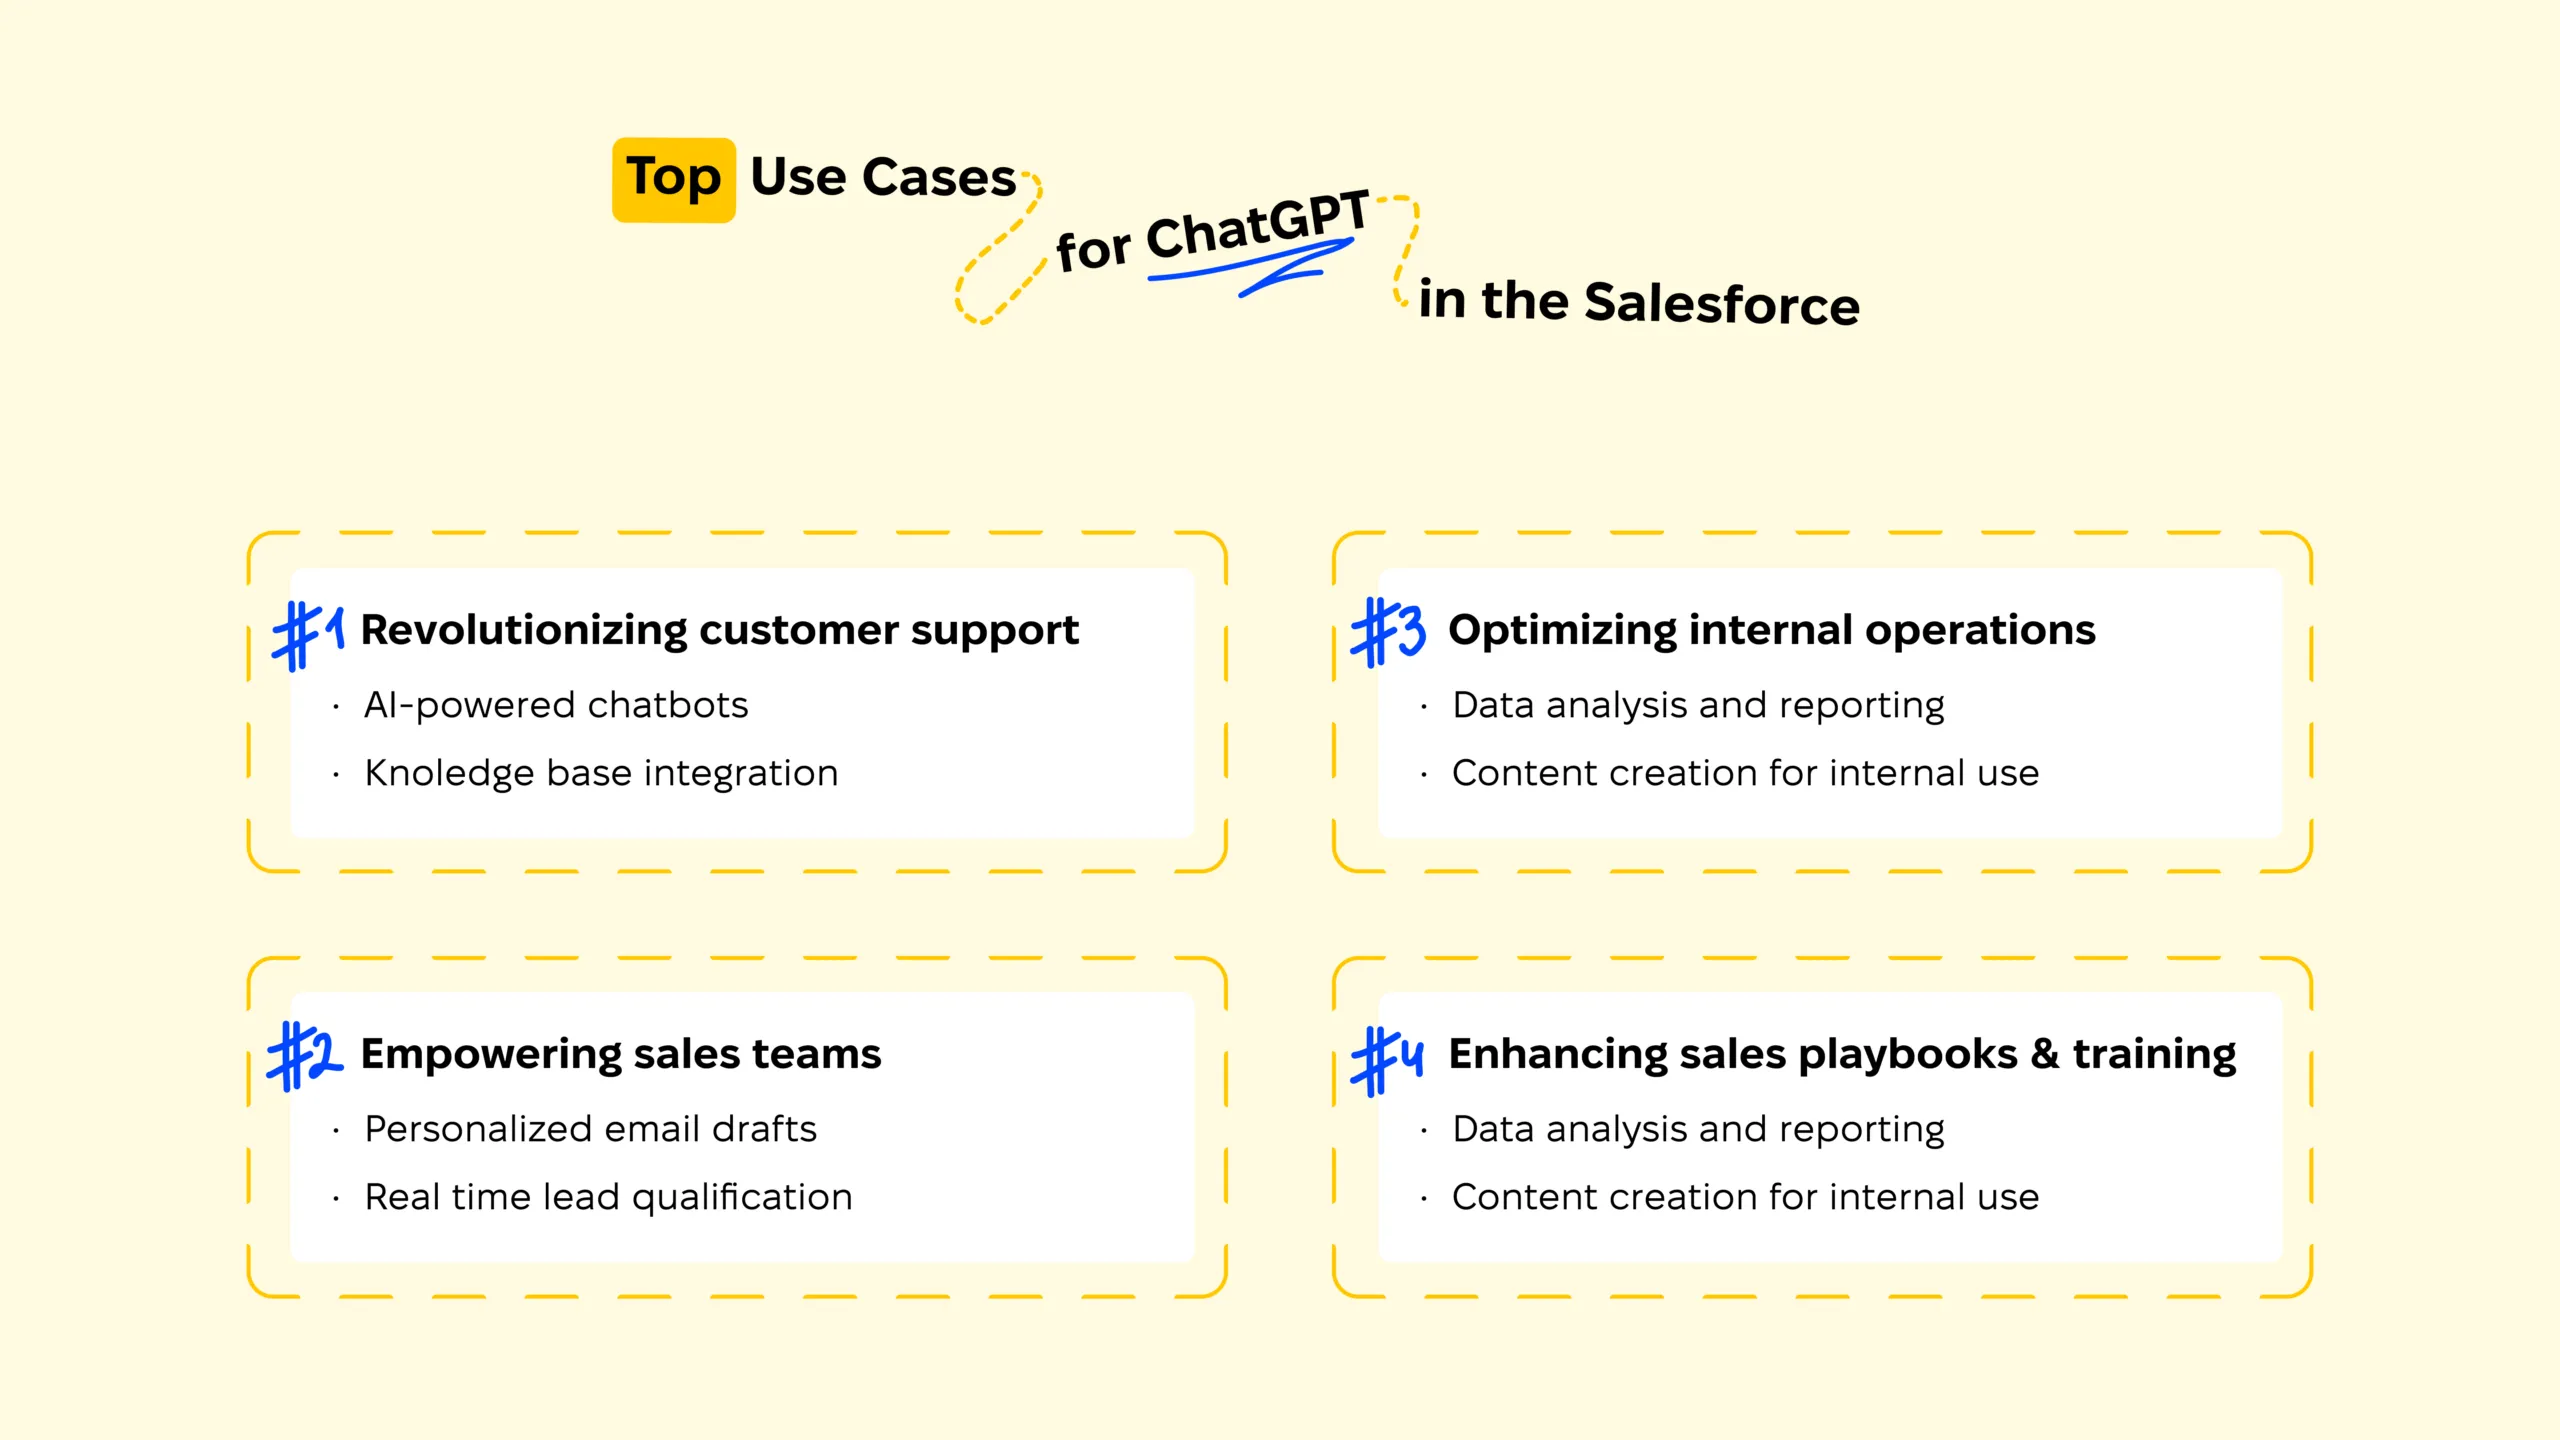 Top use cases for chatgpt in the salesforce